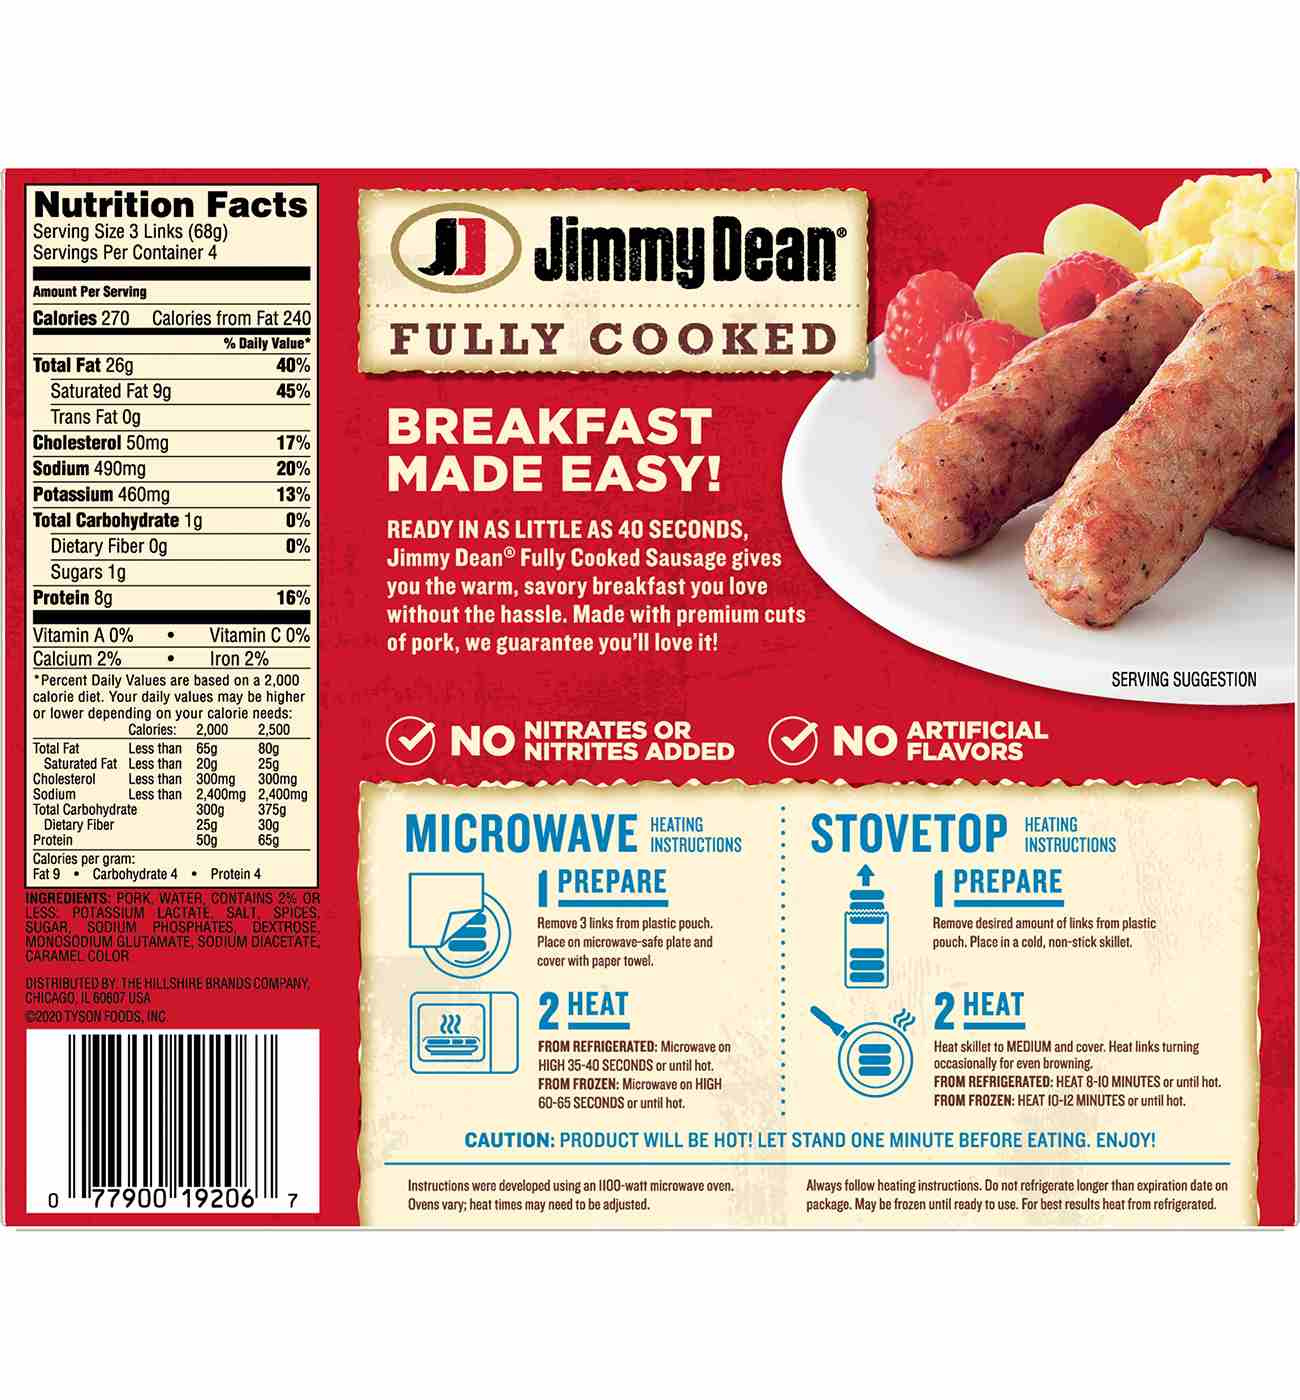 Jimmy Dean Fully Cooked Pork Breakfast Sausage Links - Original, 12 ct; image 2 of 2